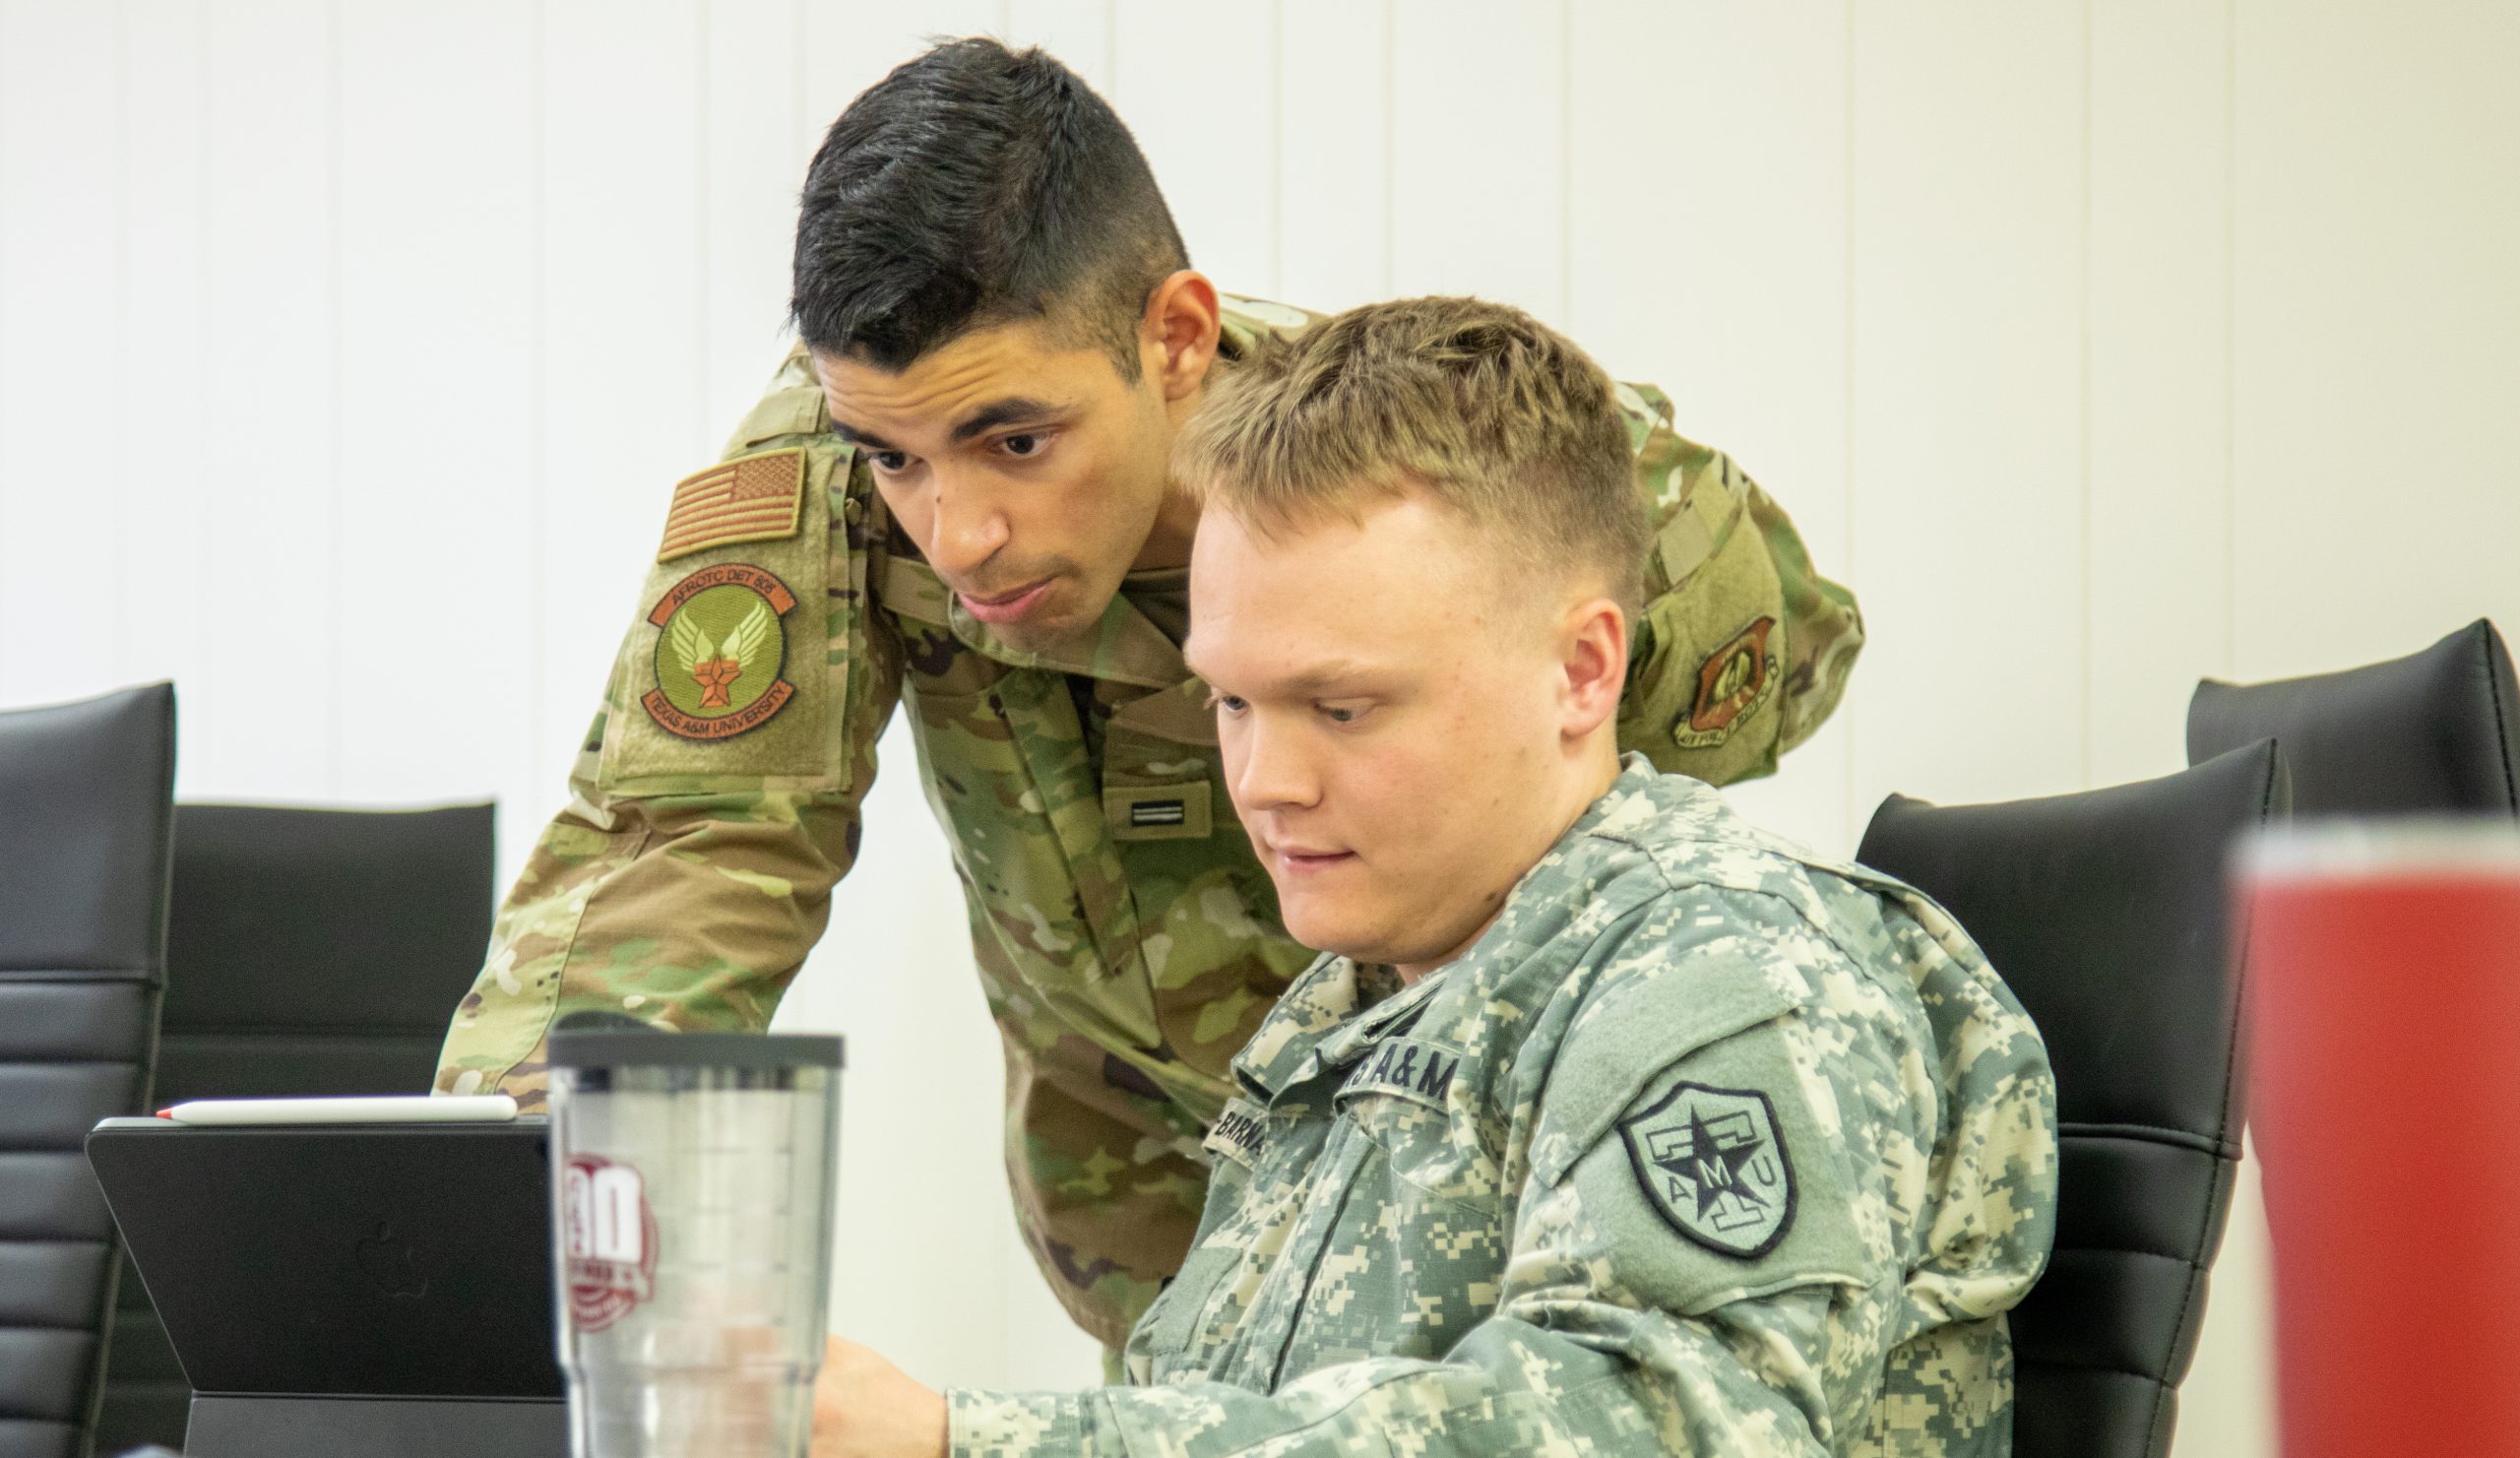 Cadets work on cyber studies